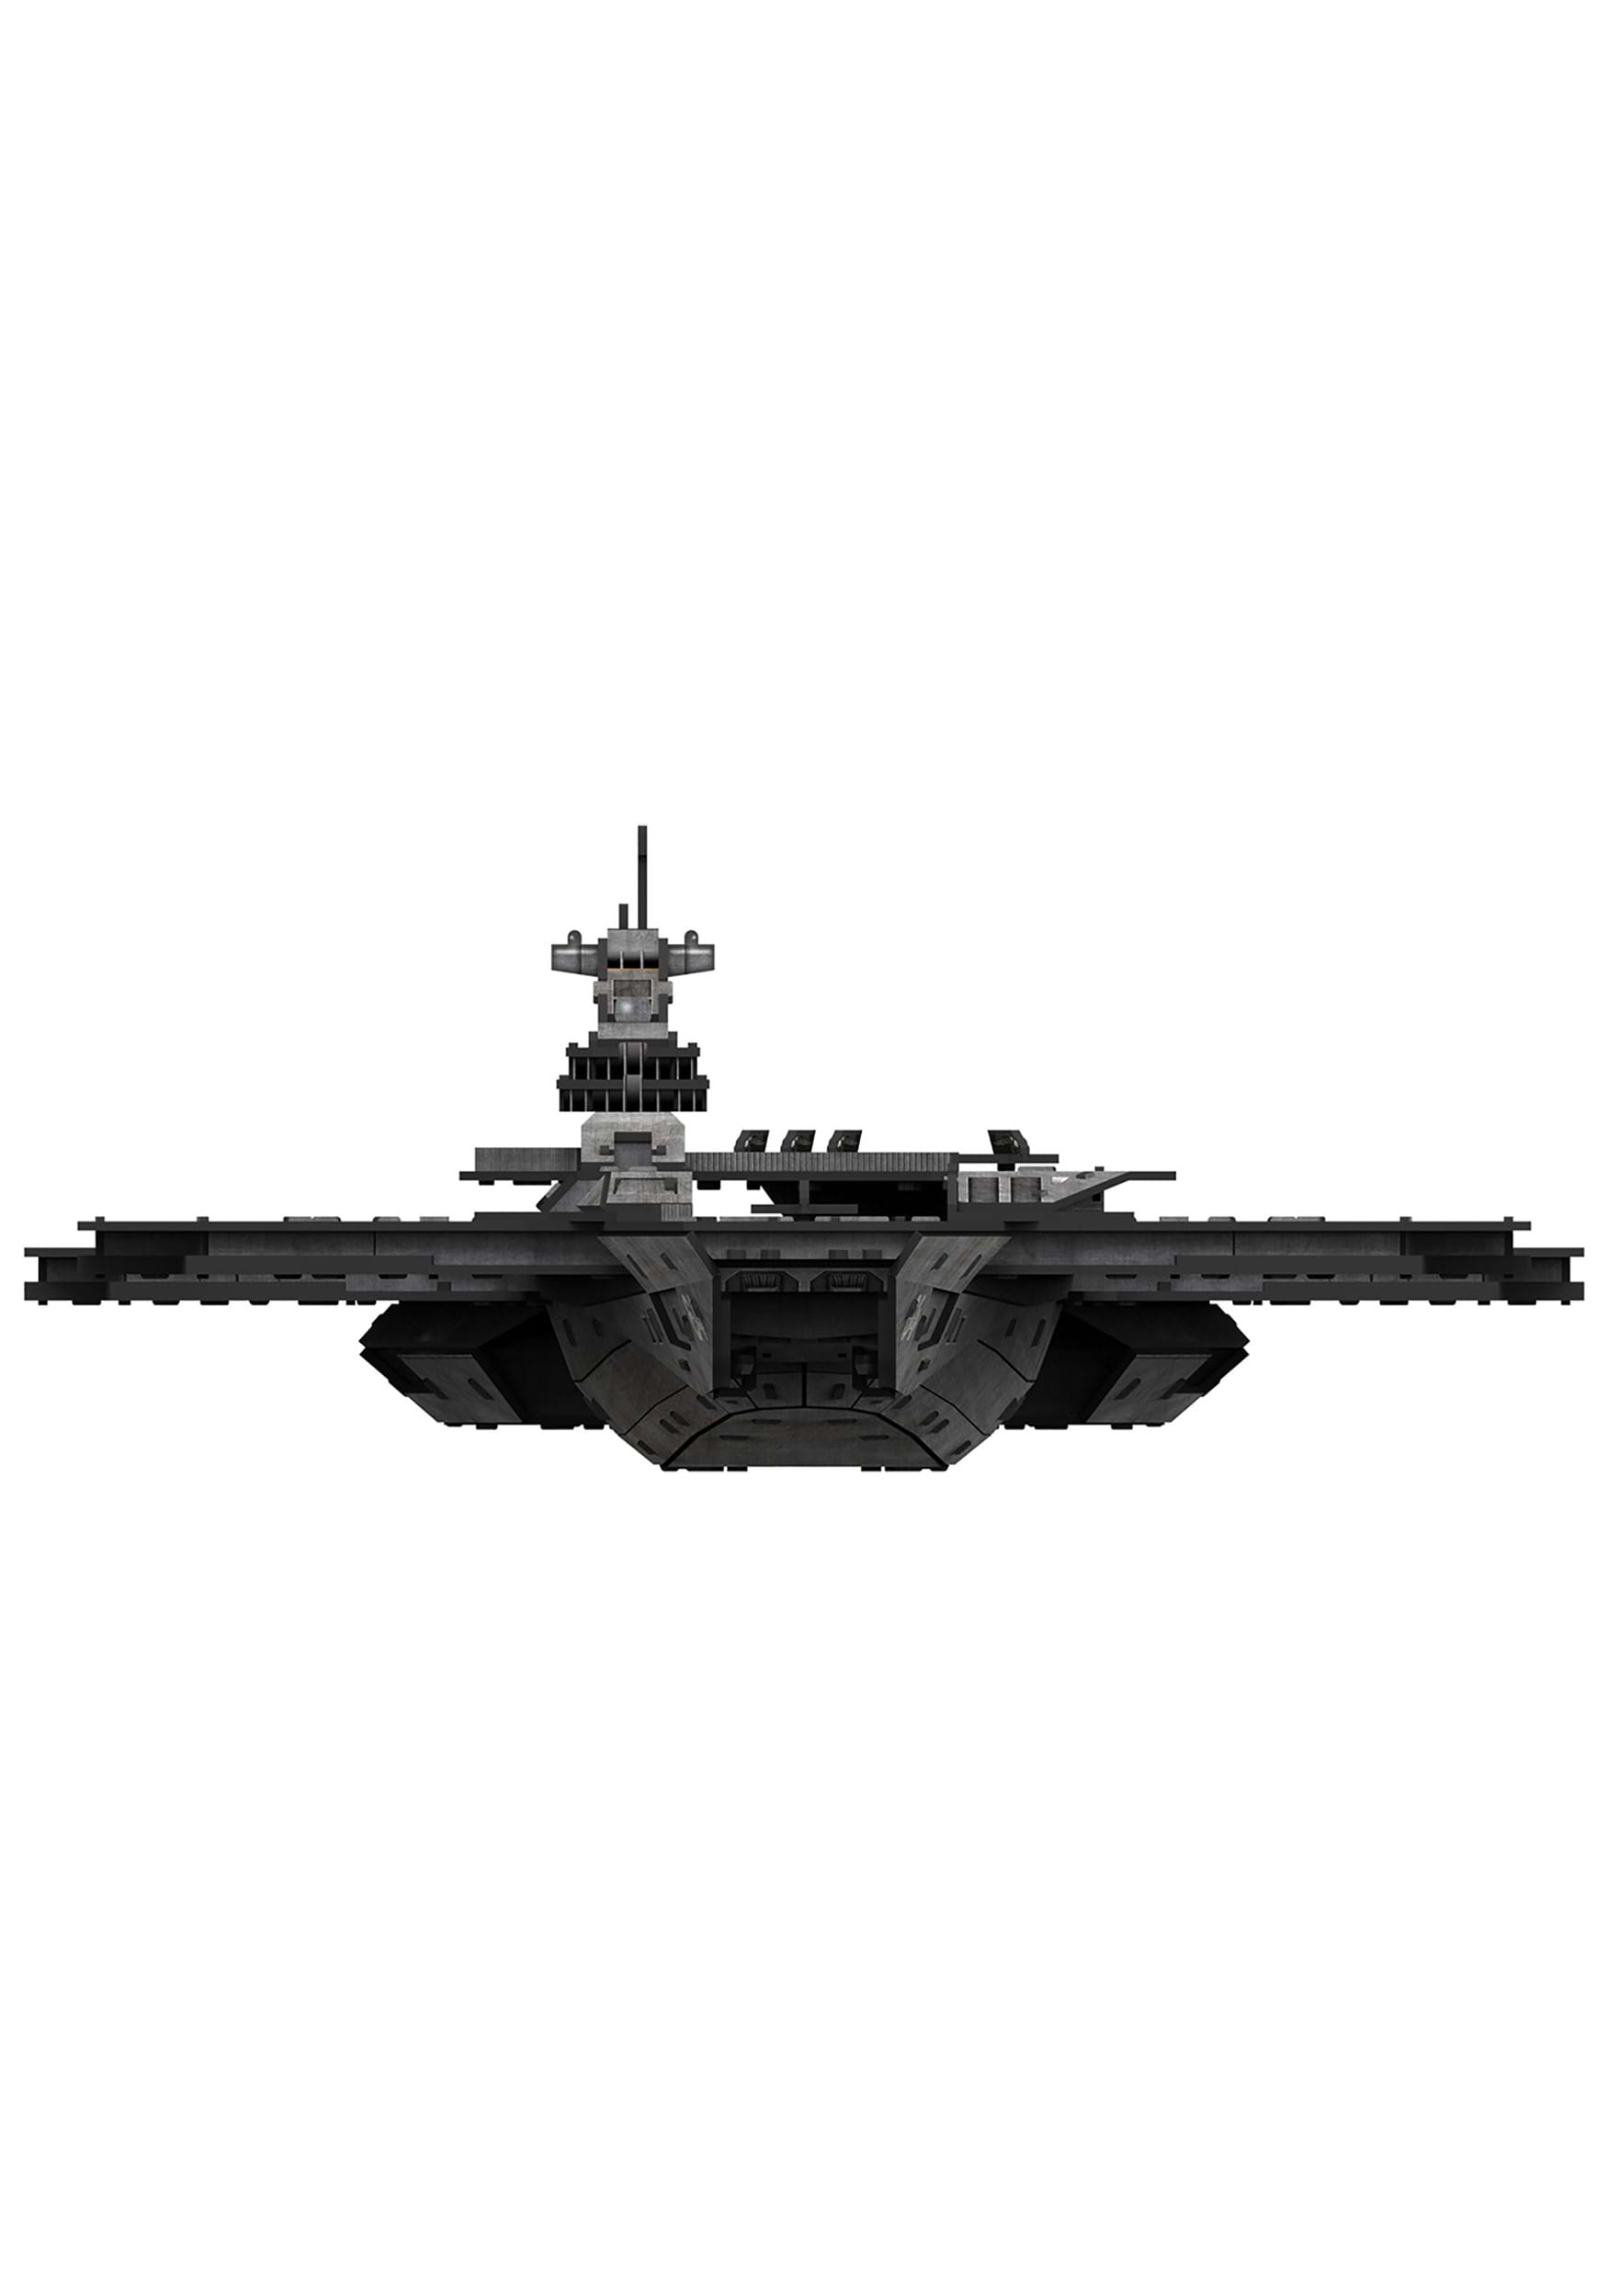 Marvel Helicarrier 3D Puzzle Medium Difficulty